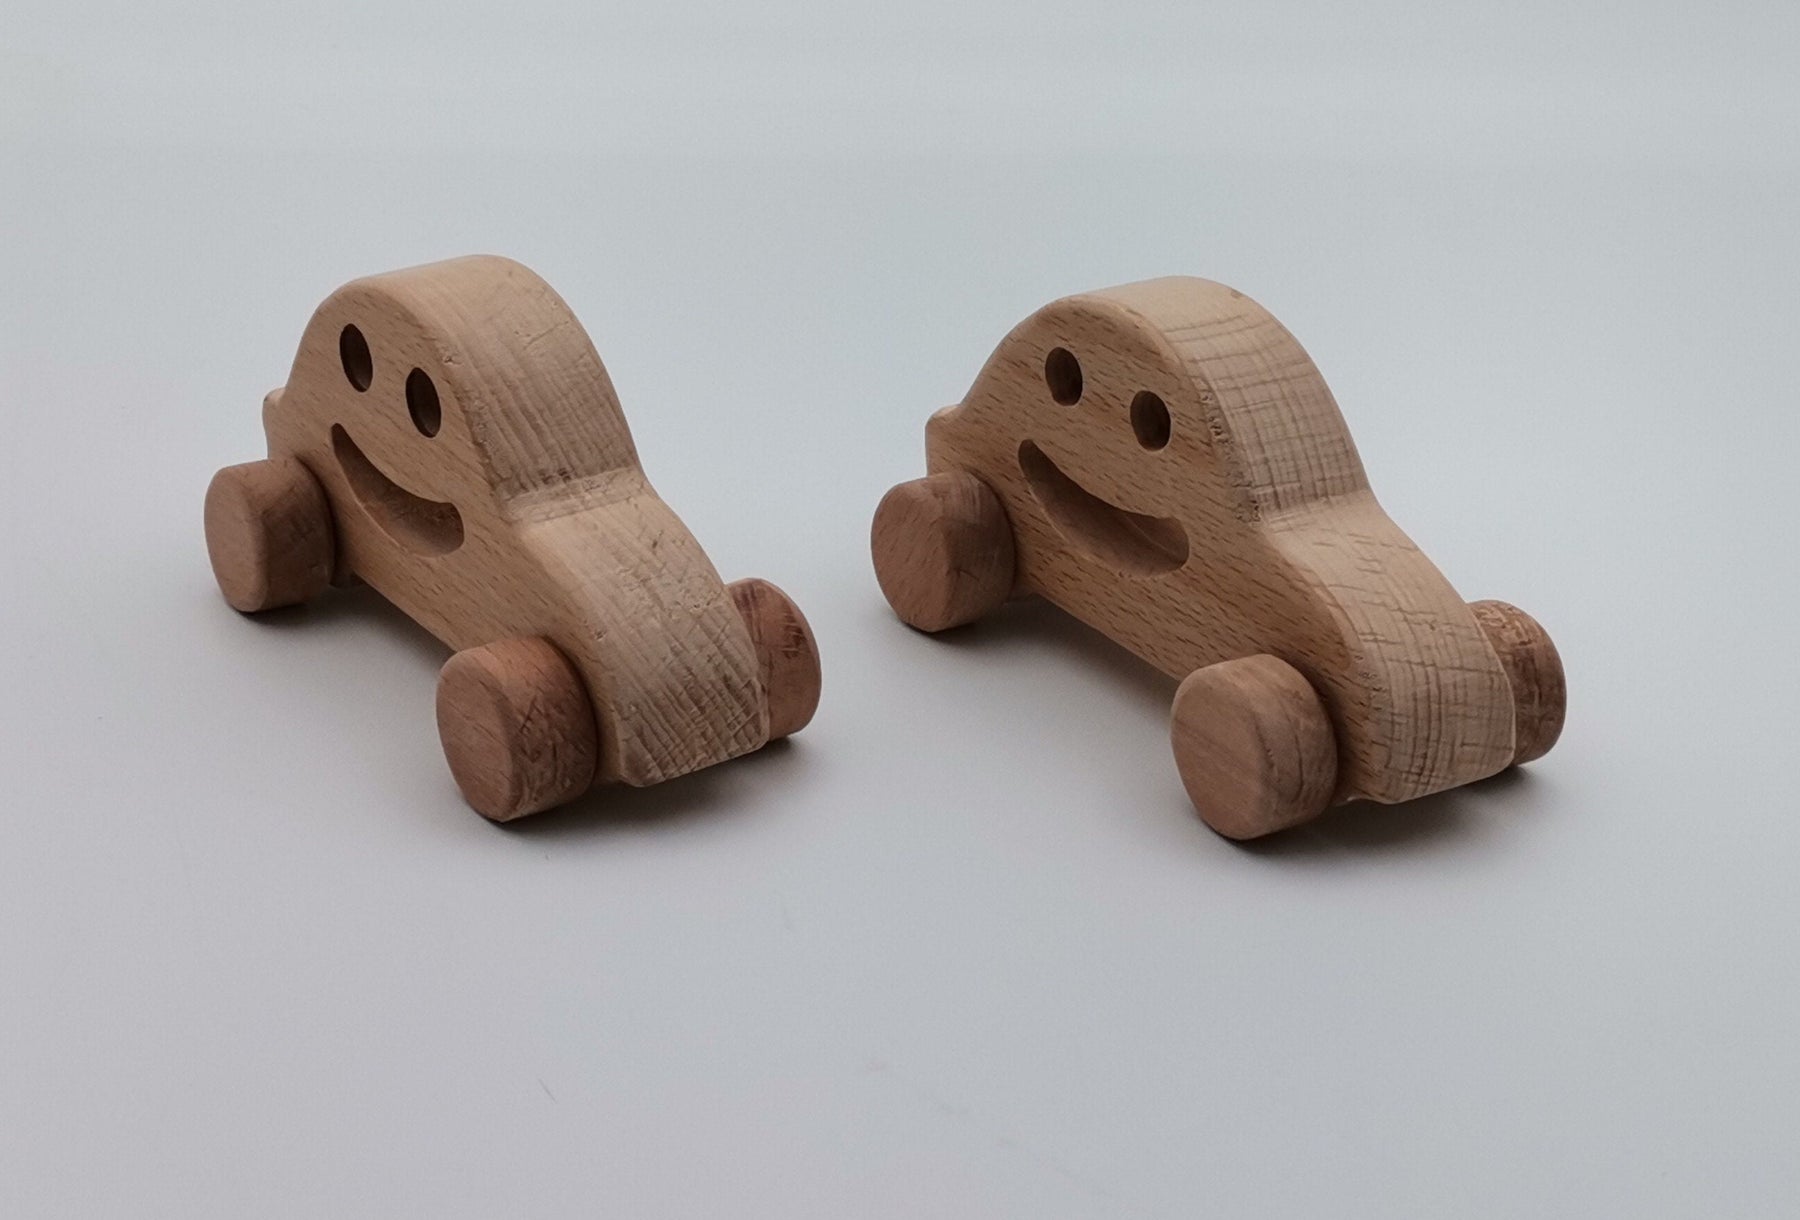 wooden toy car plans